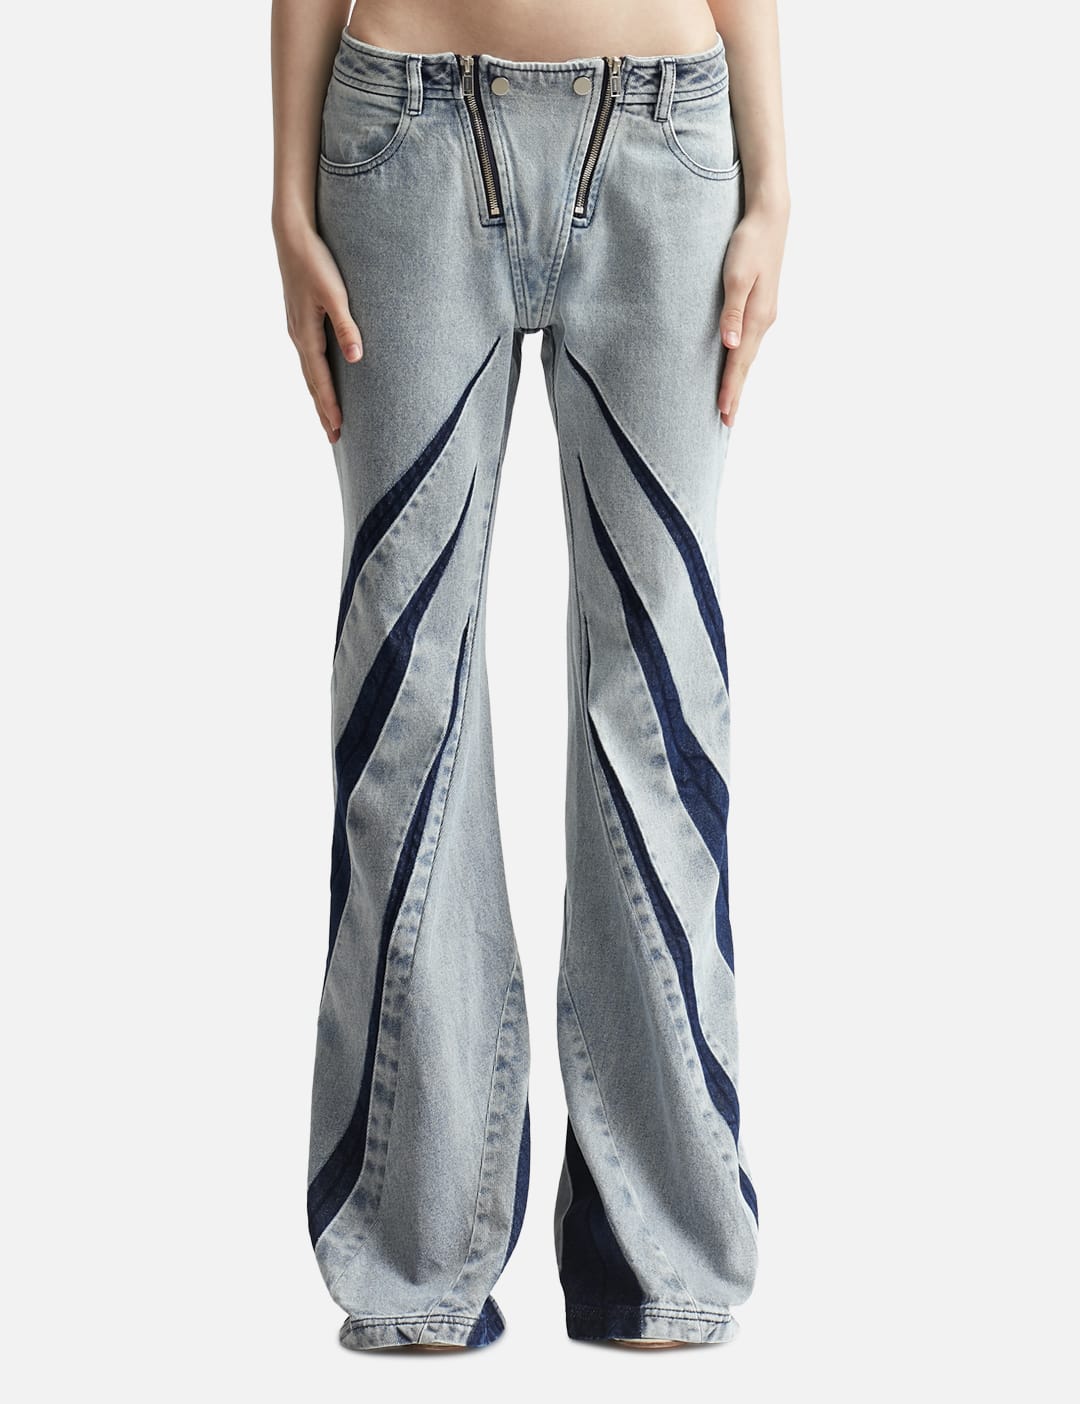 Dion Lee - DARTED DENIM PANT | HBX - Globally Curated Fashion and